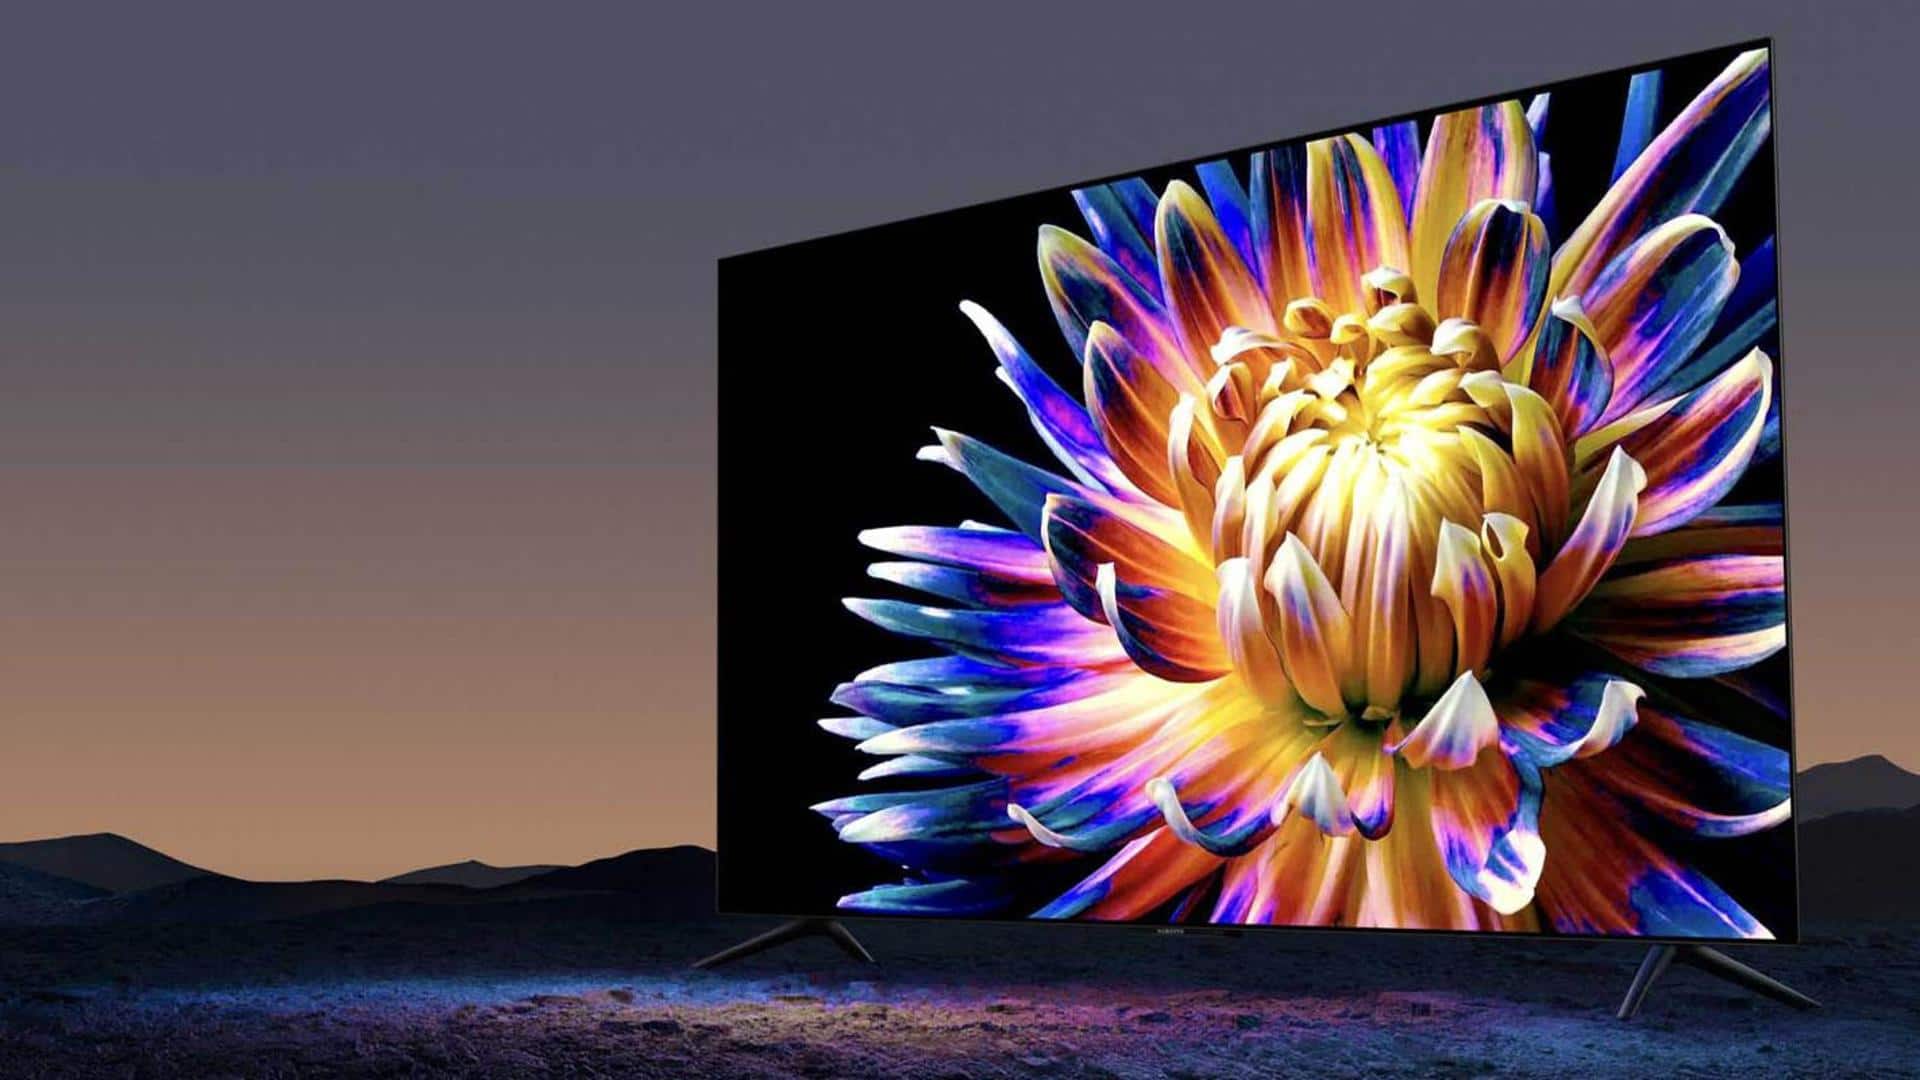 Xiaomi OLED Vision TV is nearly 60% cheaper: Check deal